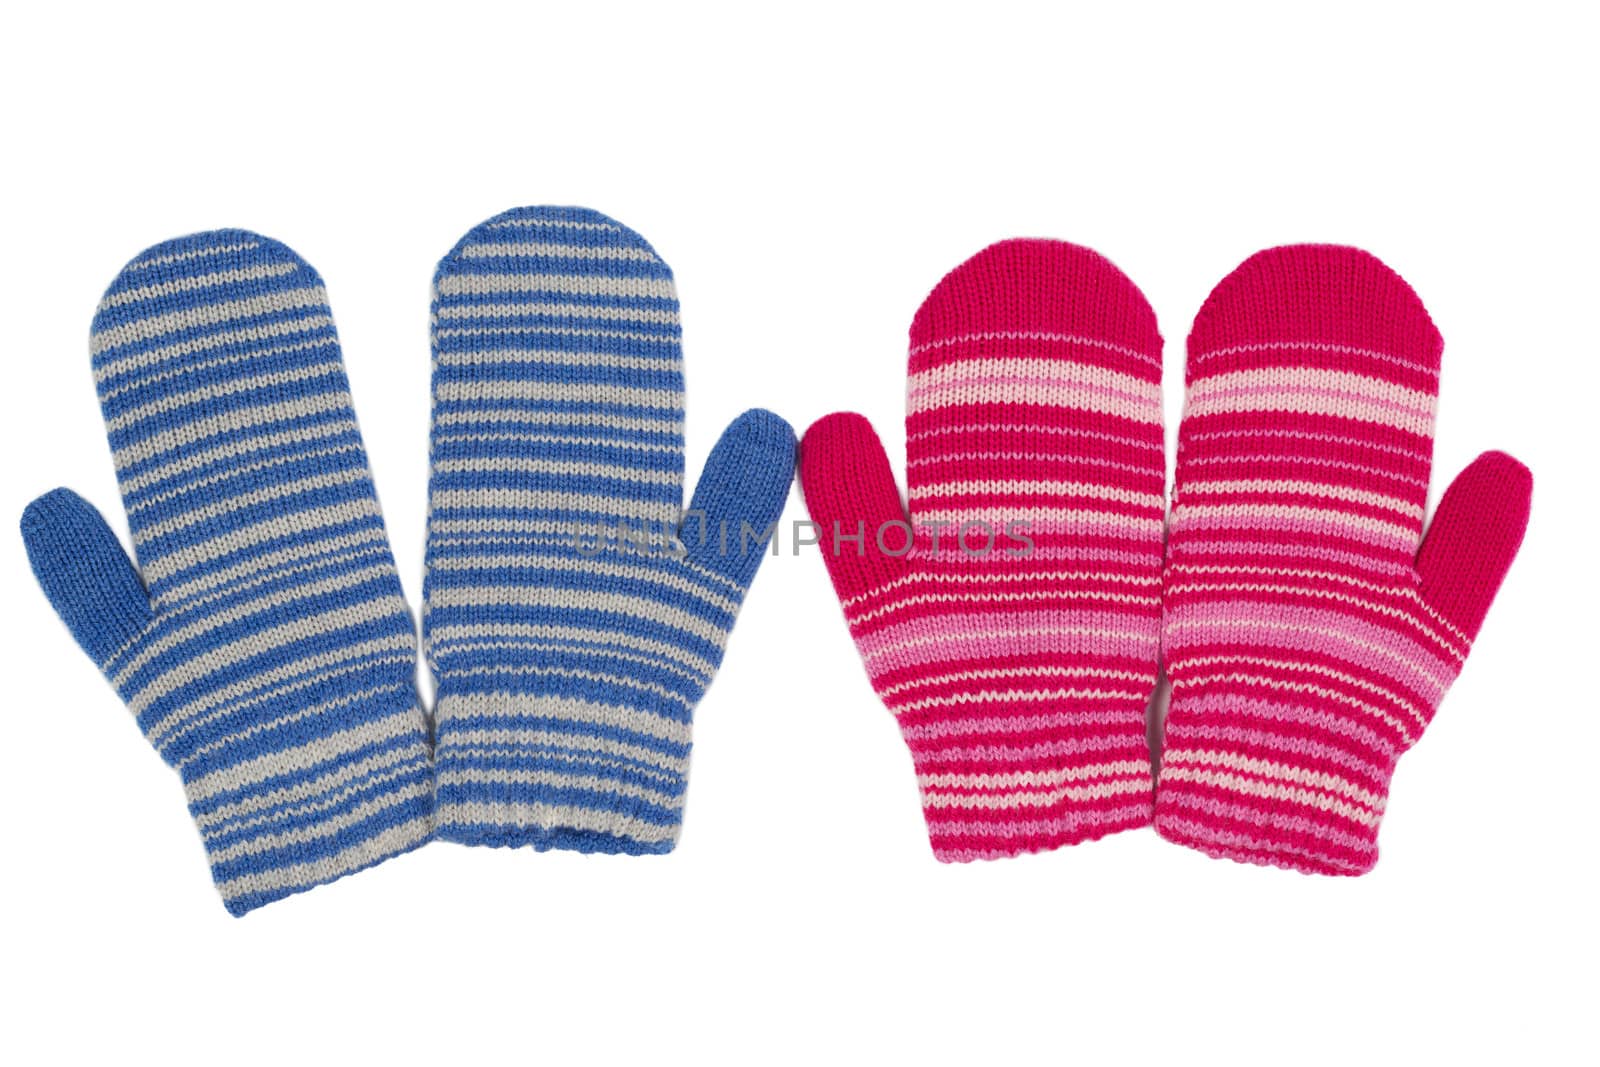 Two pairs of mittens, blue and red. by RuslanOmega